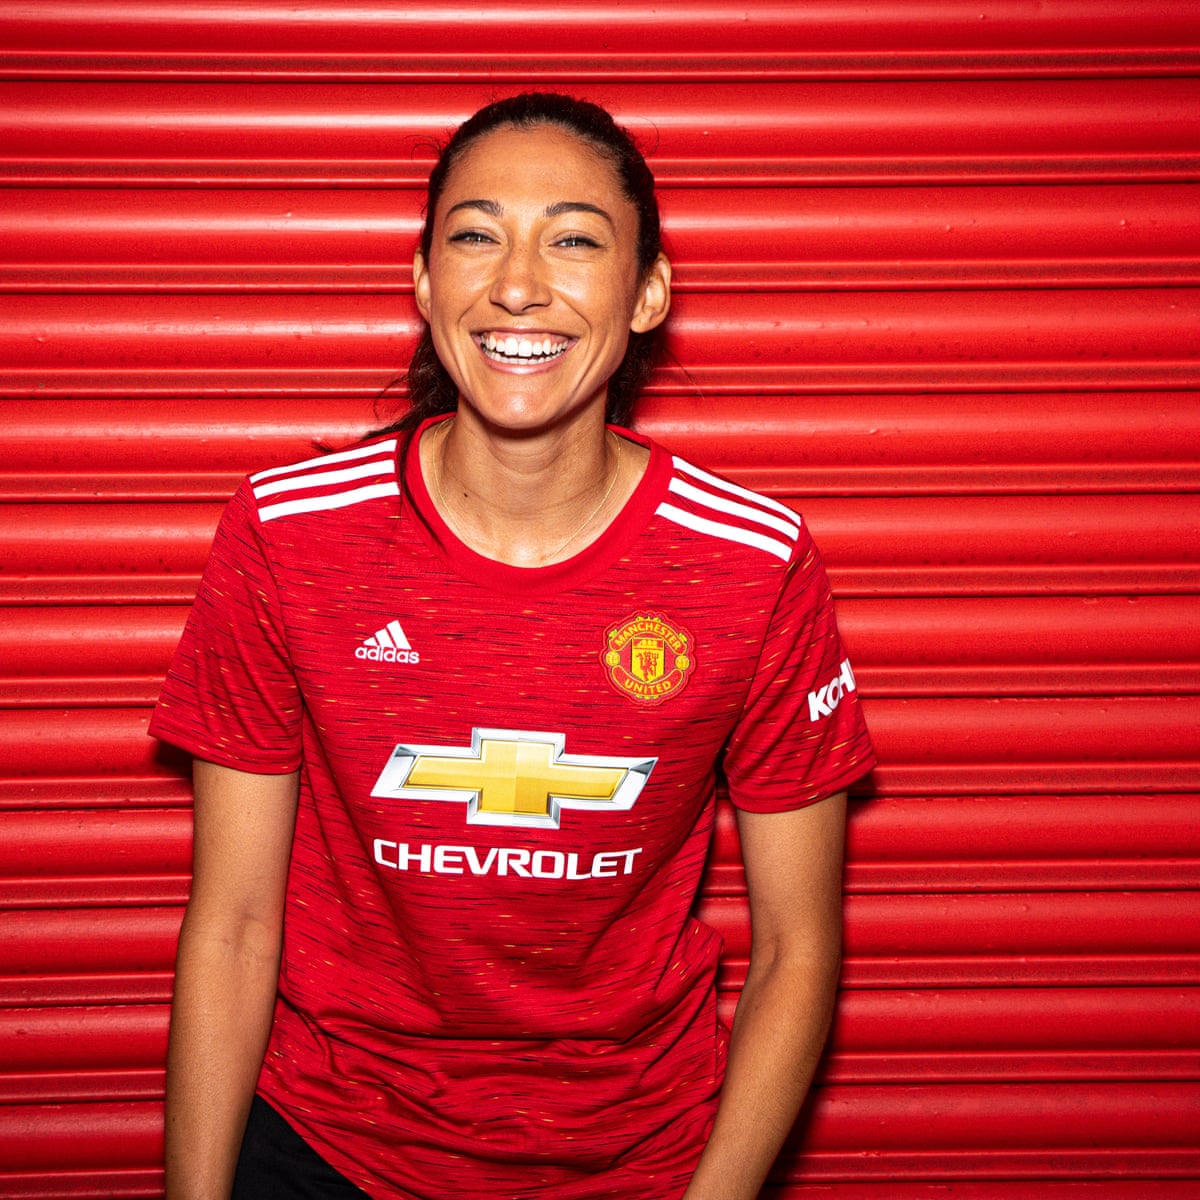 The 24-year old daughter of father (?) and mother(?) Christen Press in 2023 photo. Christen Press earned a  million dollar salary - leaving the net worth at  million in 2023